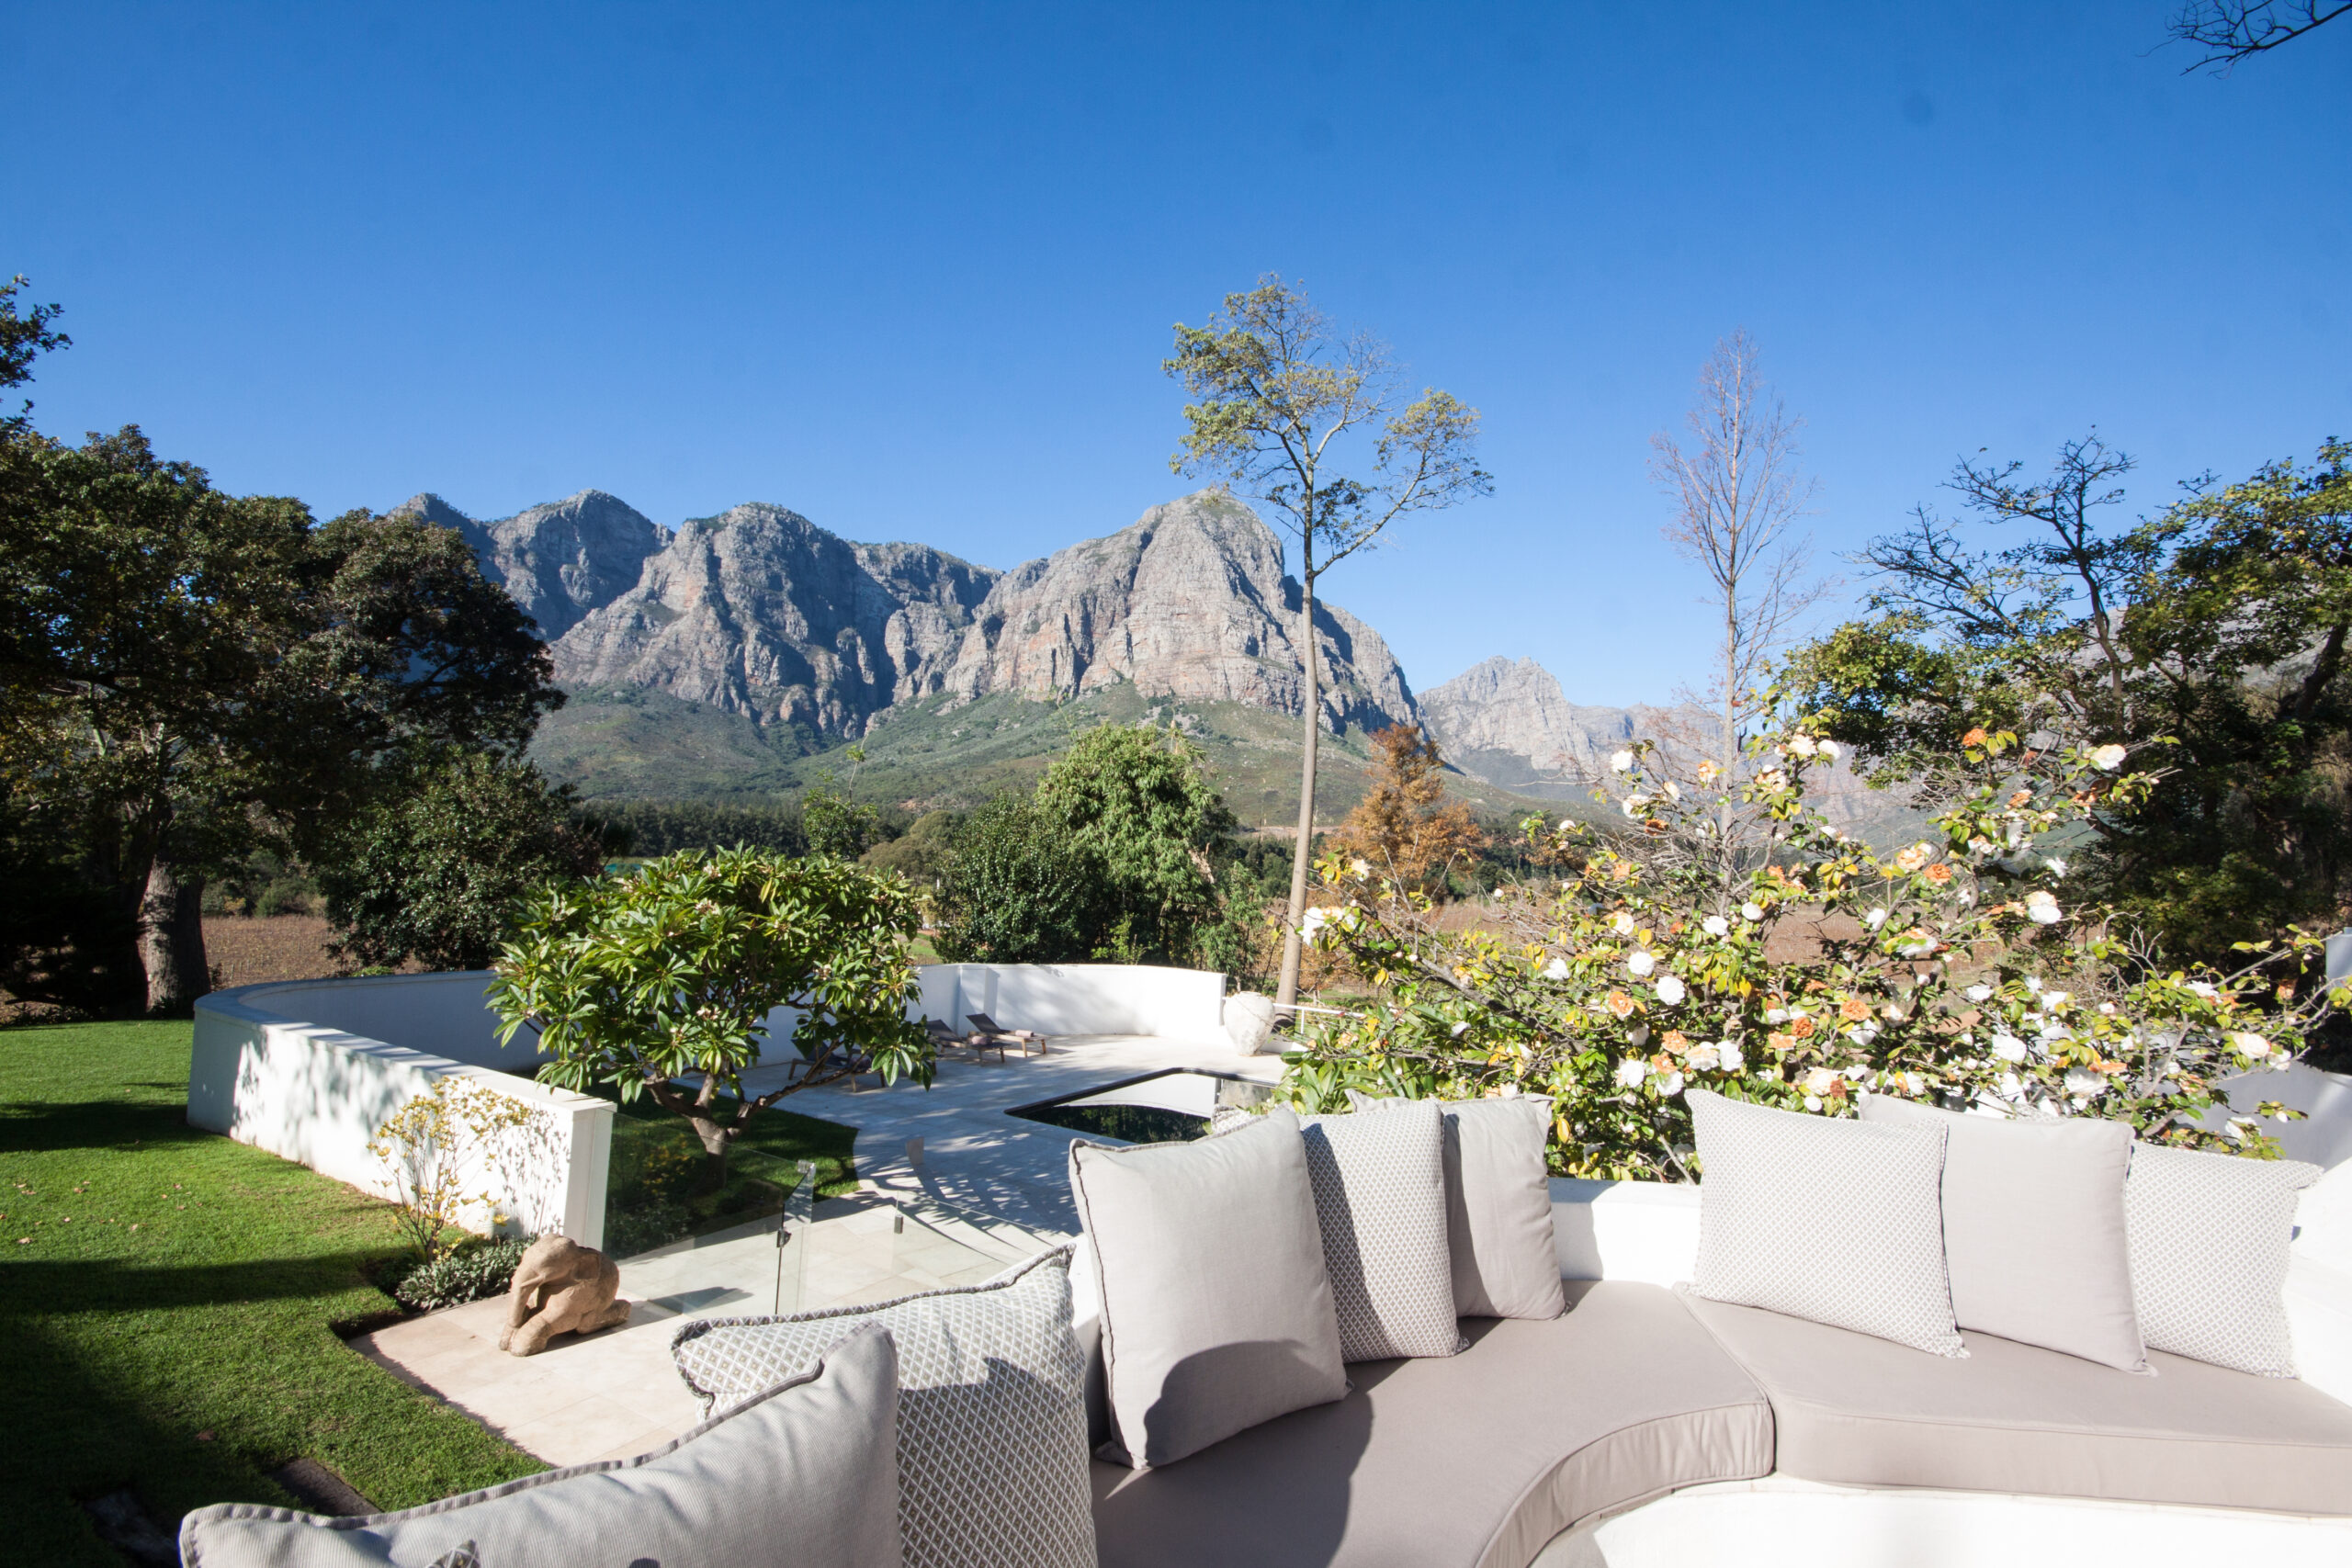 Braai Patio Lounging Corner With View Of Pool Area And Surrounding Mountains